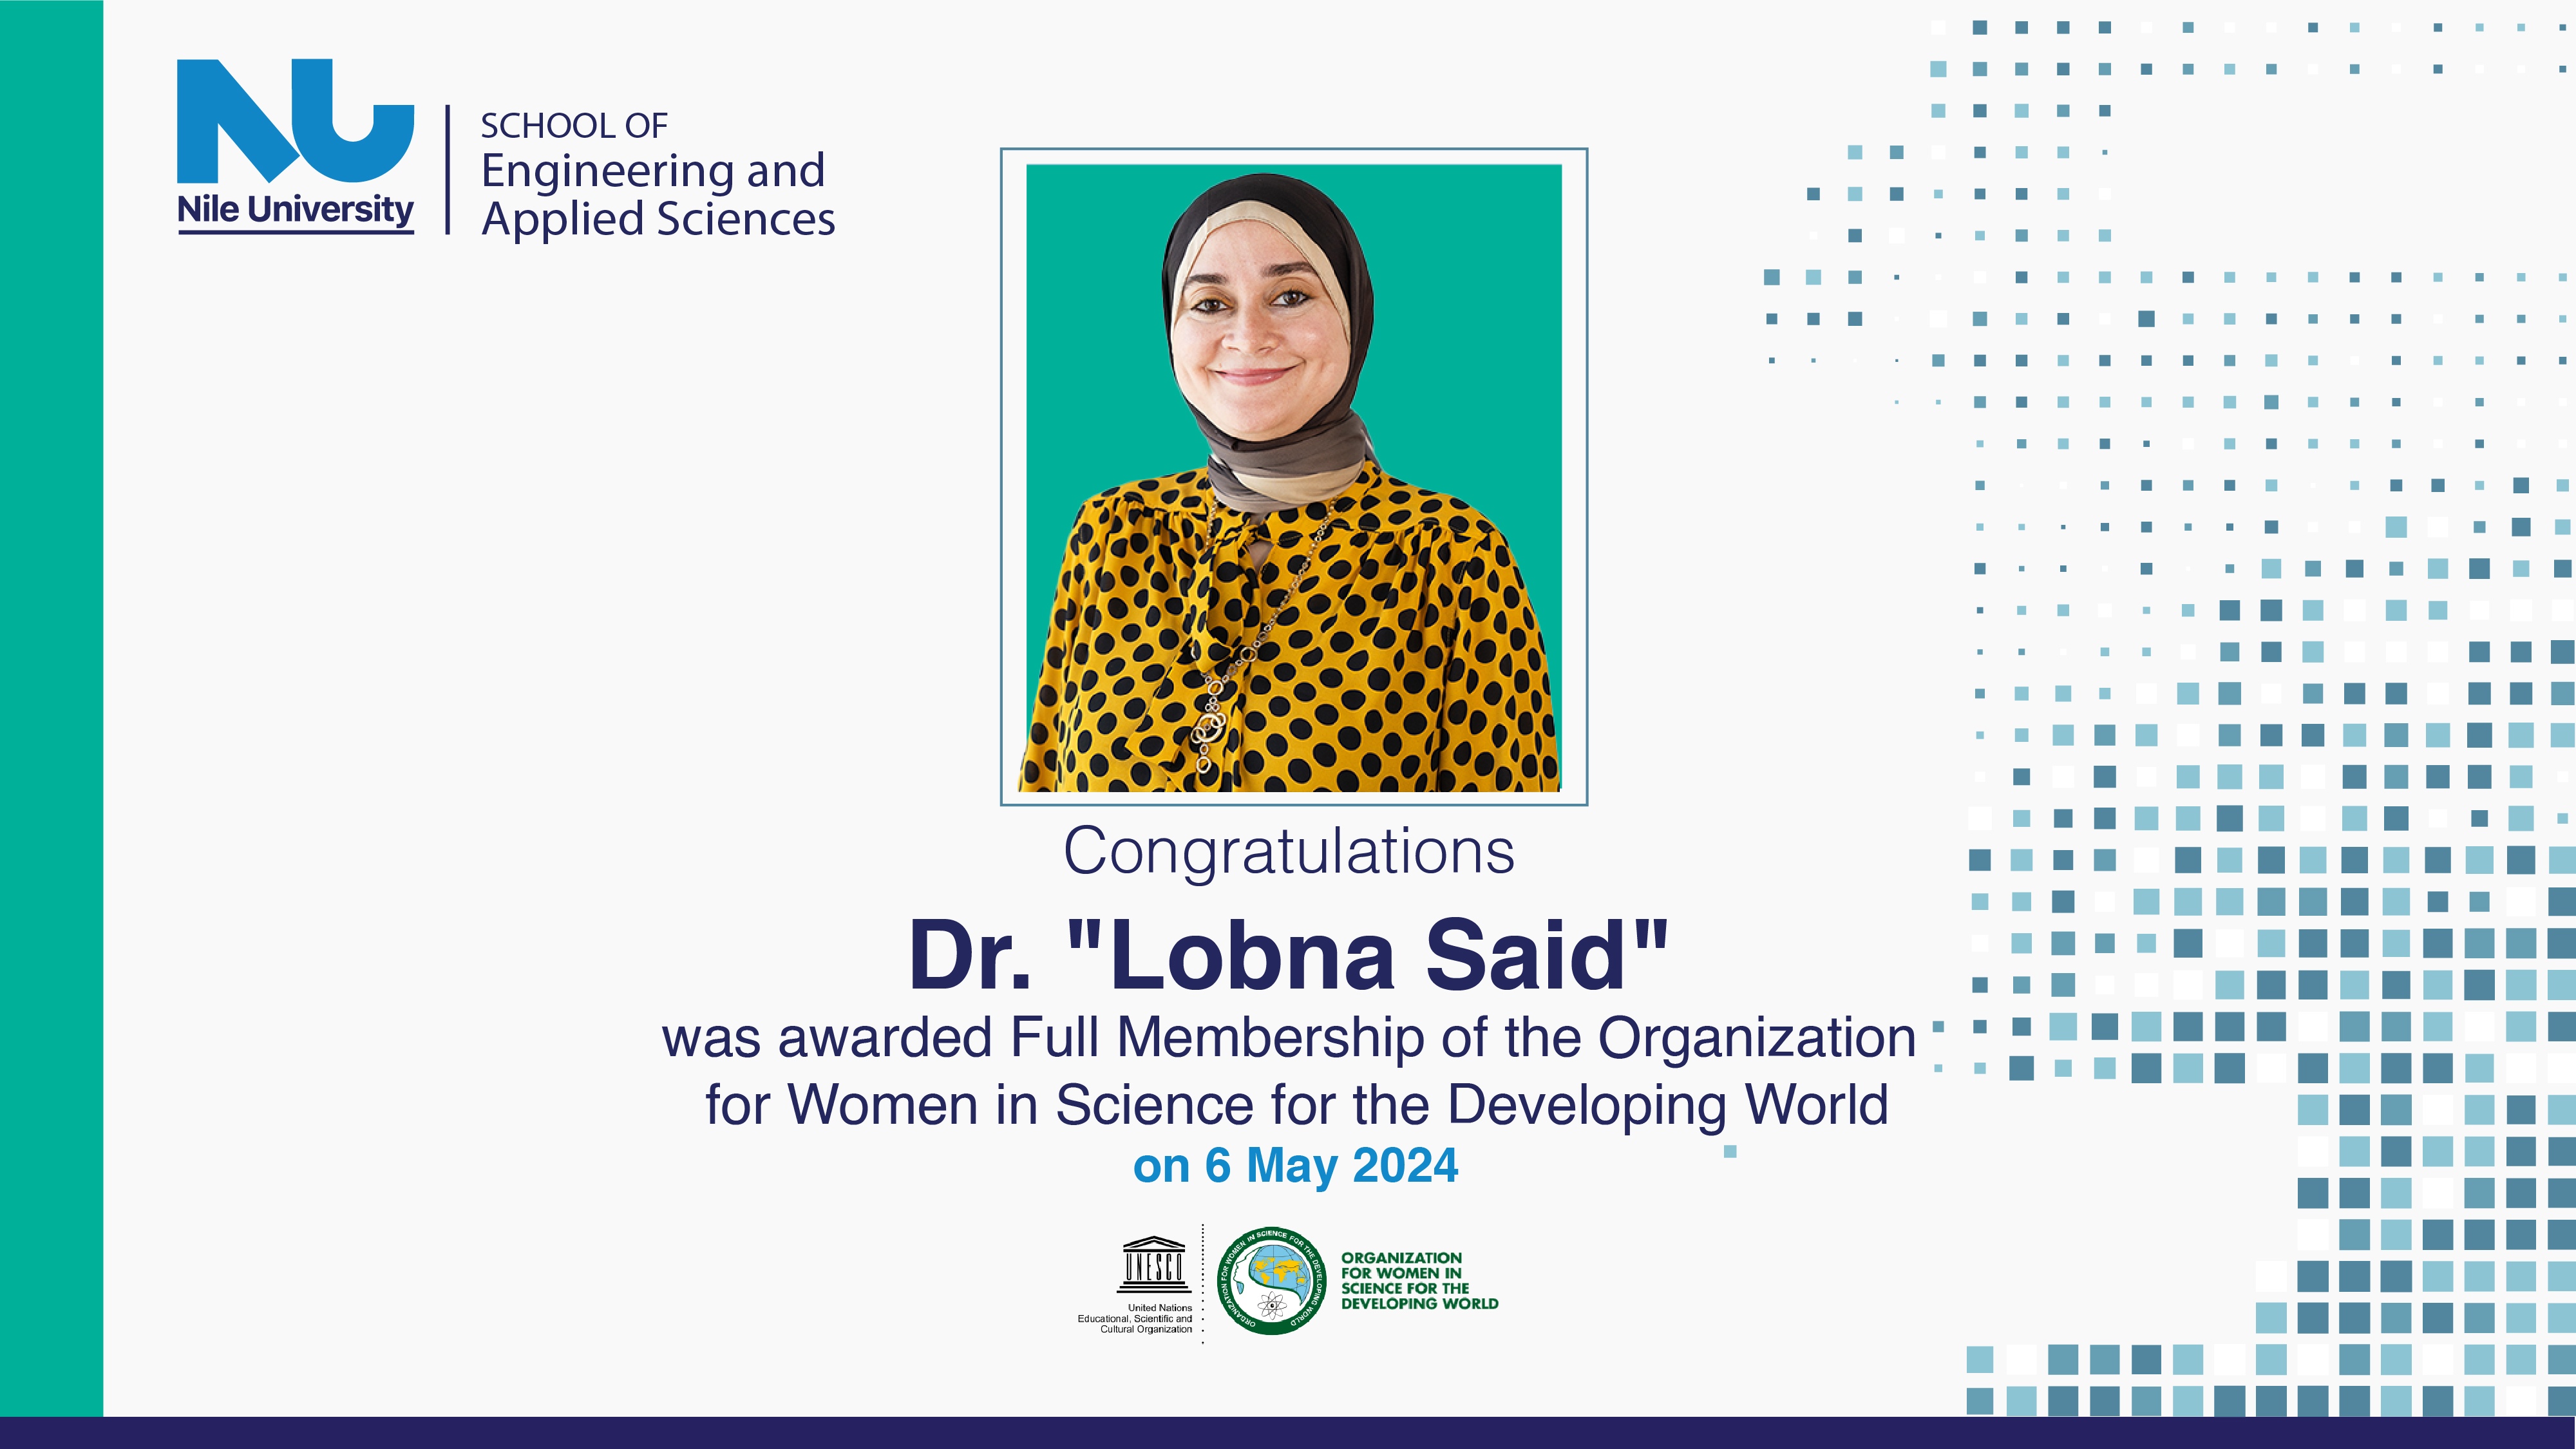 Dr. Lobna Said Recognized with Full Membership by Organization for Women in Science for the Developing World